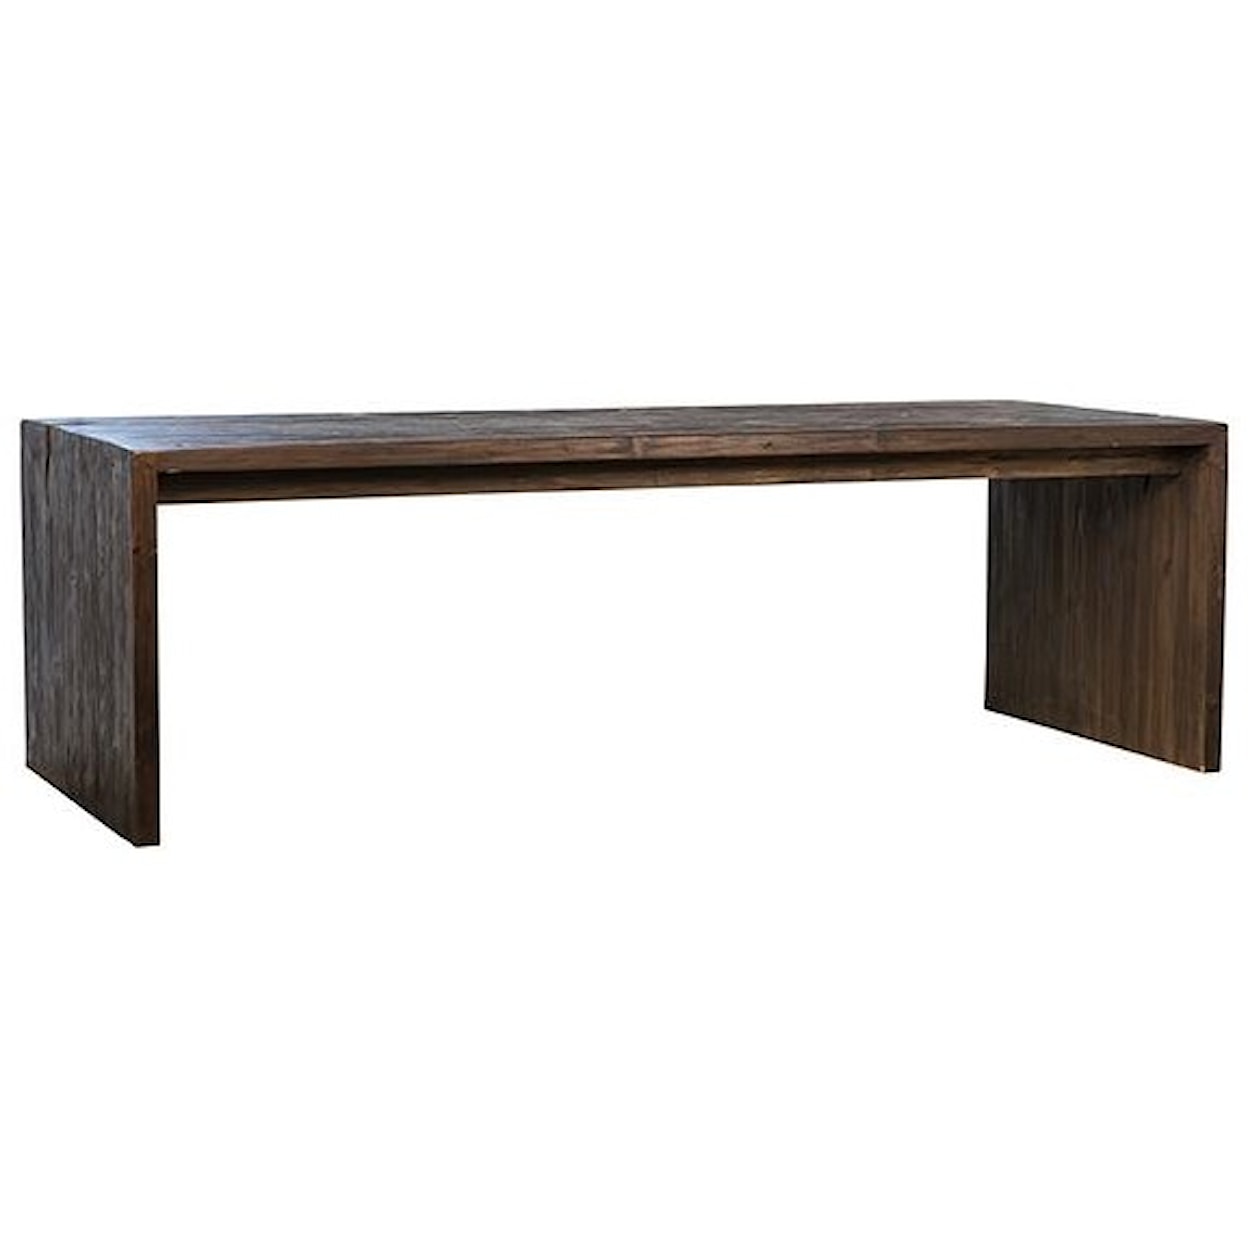 Dovetail Furniture Dining Tables Merwin Dining Table